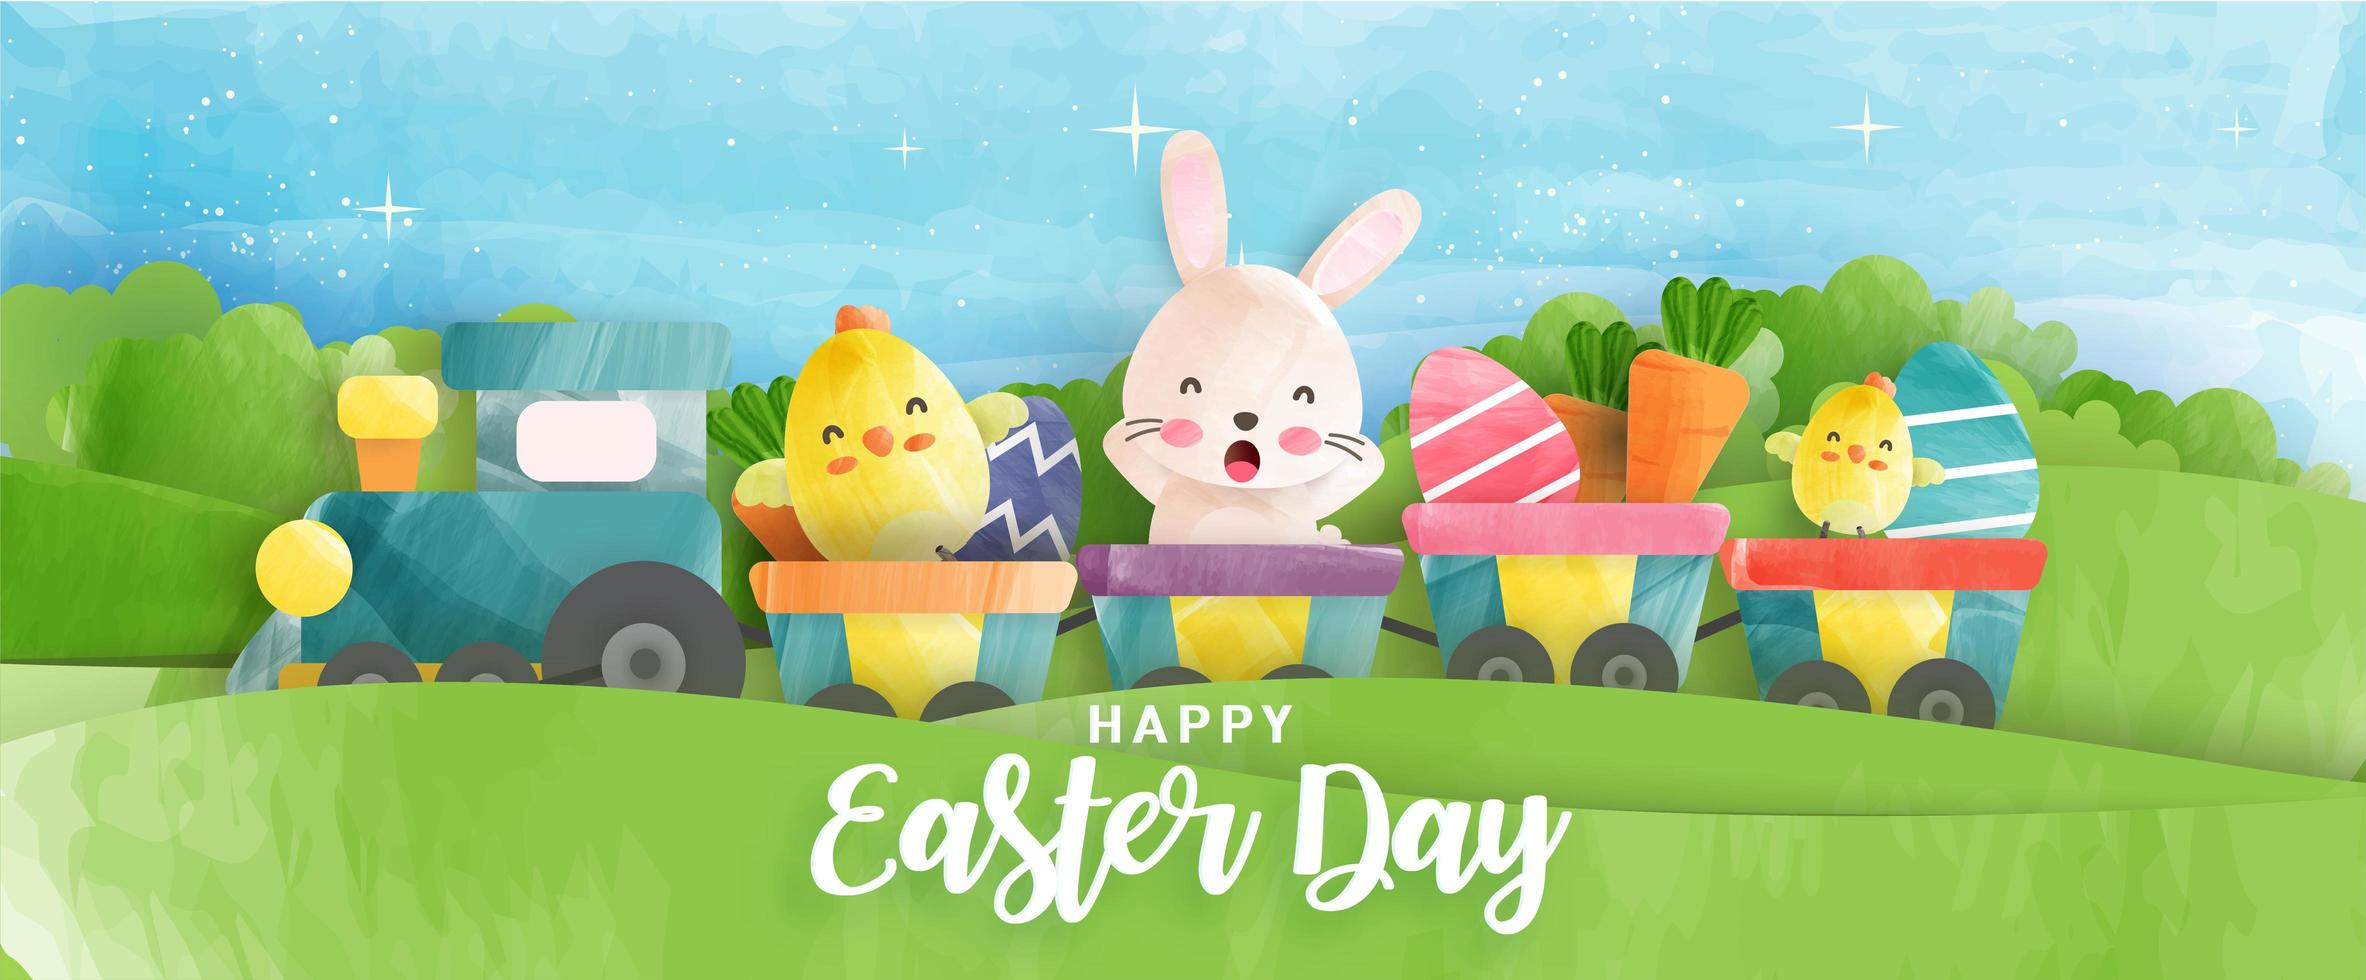 Watercolor Style Easter Banner with Chickens, Rabbit and Eggs vector